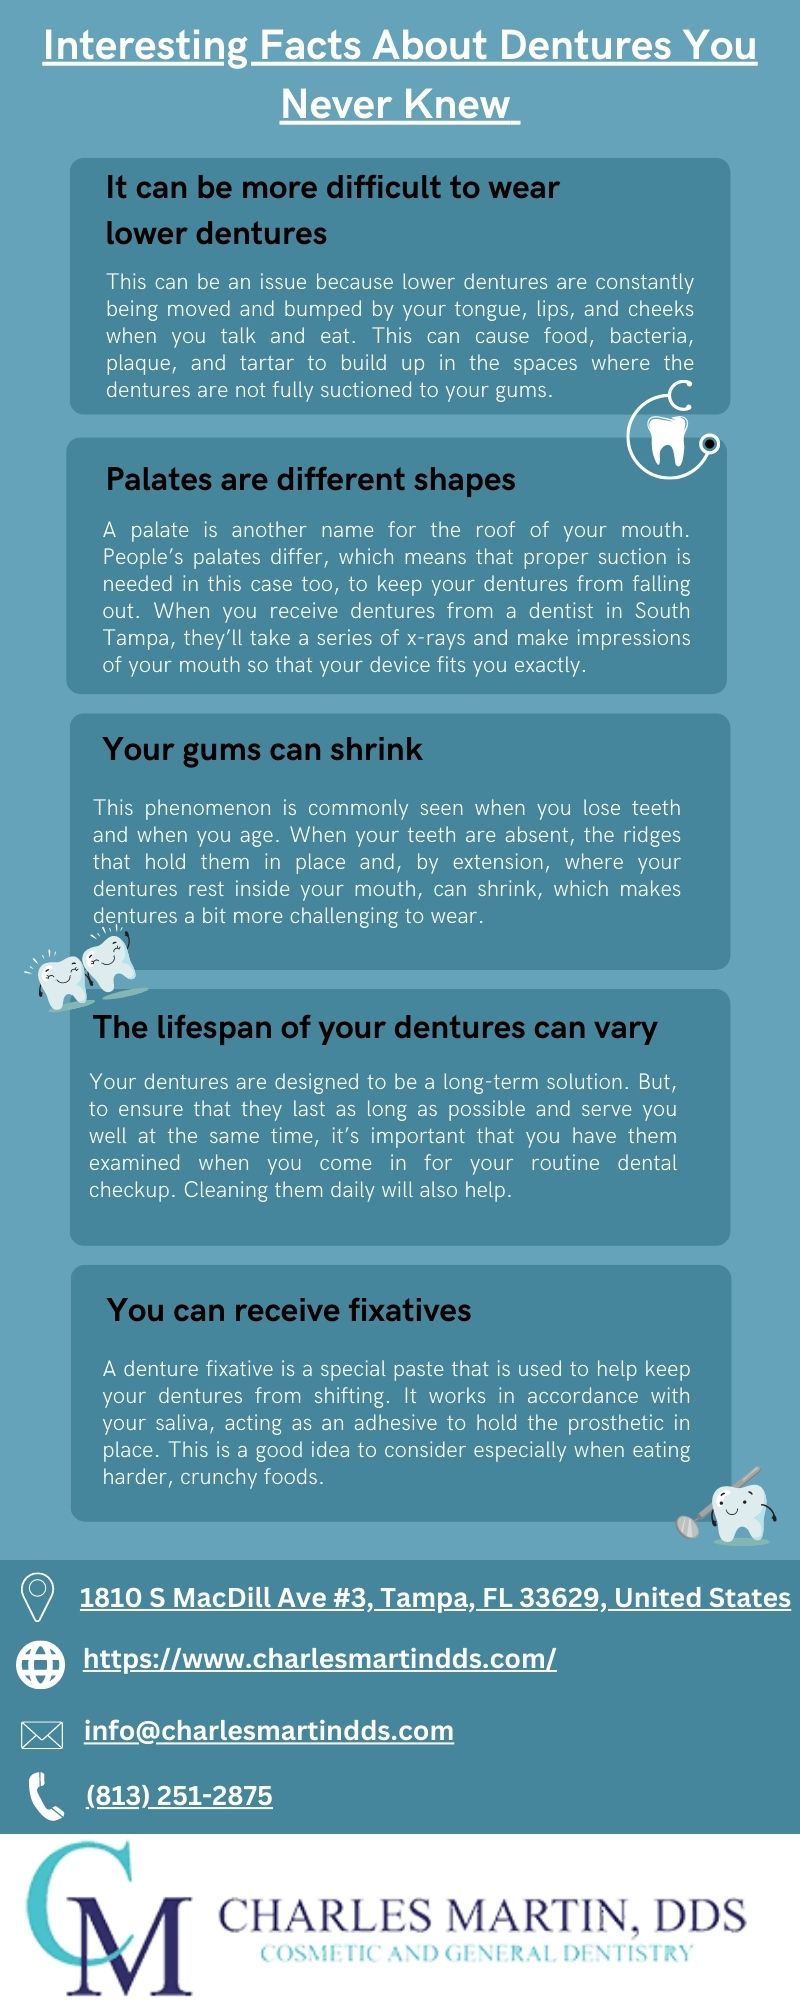 Interesting Facts About Dentures You
Never Knew

his can be an iss

 
 
 
 
   
       

 

sRE Tate lof
you talk ar

and tartar tc
tures are not fully s

 

 

our gums

res a bit more challengir

 

 

A denture fixativ

  
 
 
 

ur dentures fr

 

place
harder, crunchy

1810 S MacDill Ave #3, Tampa, FL 33629, United States

(2) https://www.charlesmartindds.com/

54 info@charlesmartindds.com

" (813) 251-2875

CHARLES MARTIN, DDS